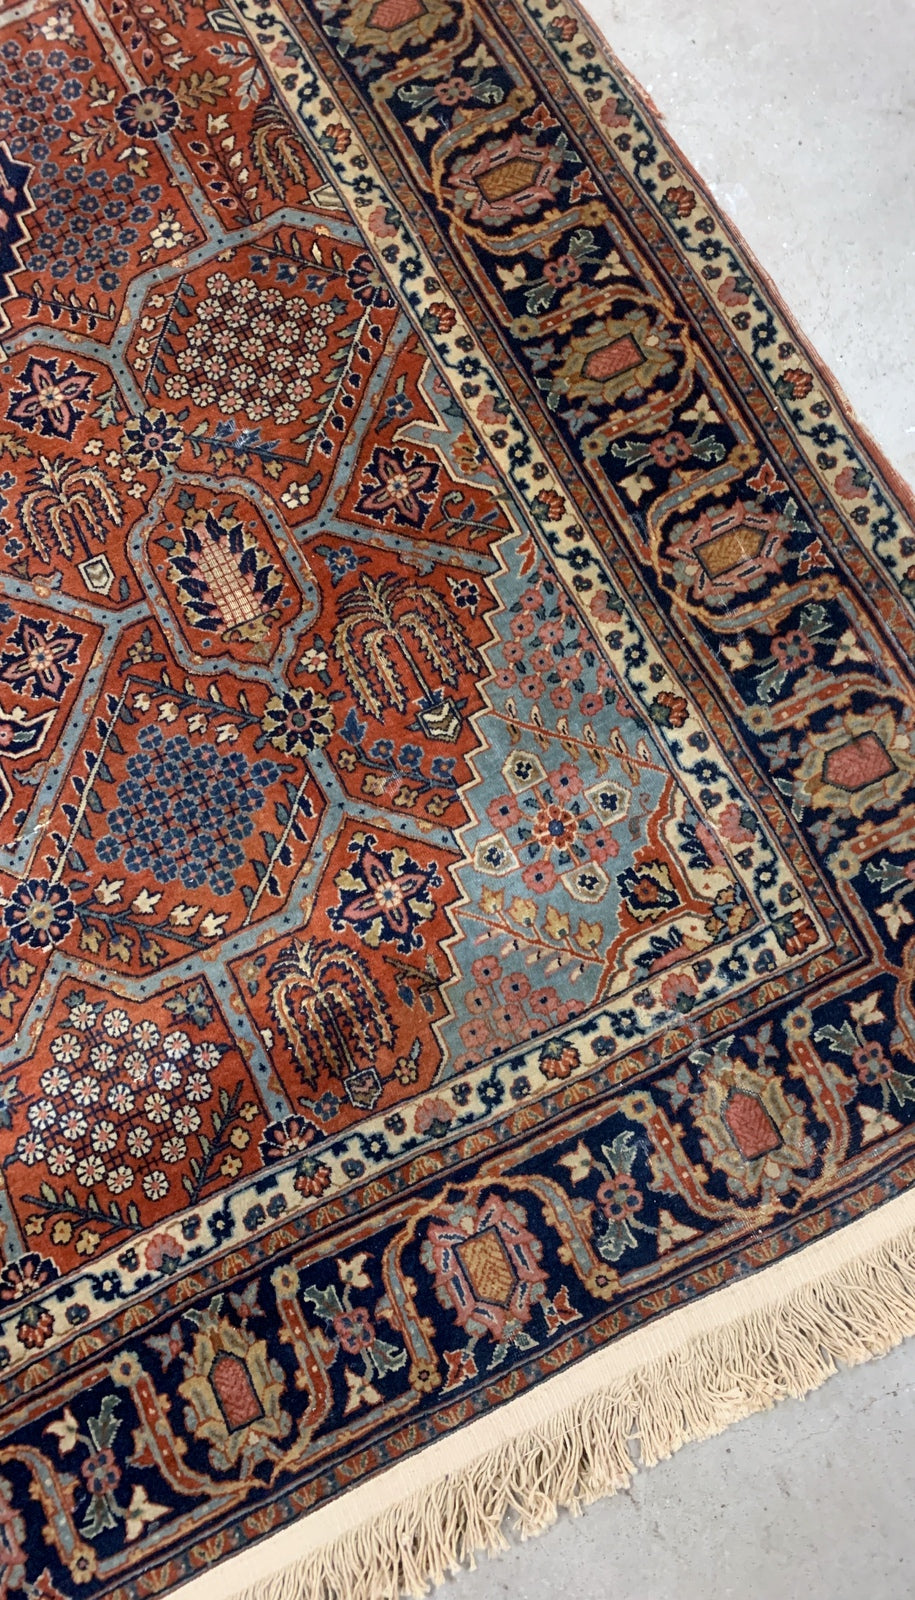 Handmade antique Persian Jozan rug in traditional design with large medallion. The rug is from the beginning of 20th century in good condition. All dyes are natural.